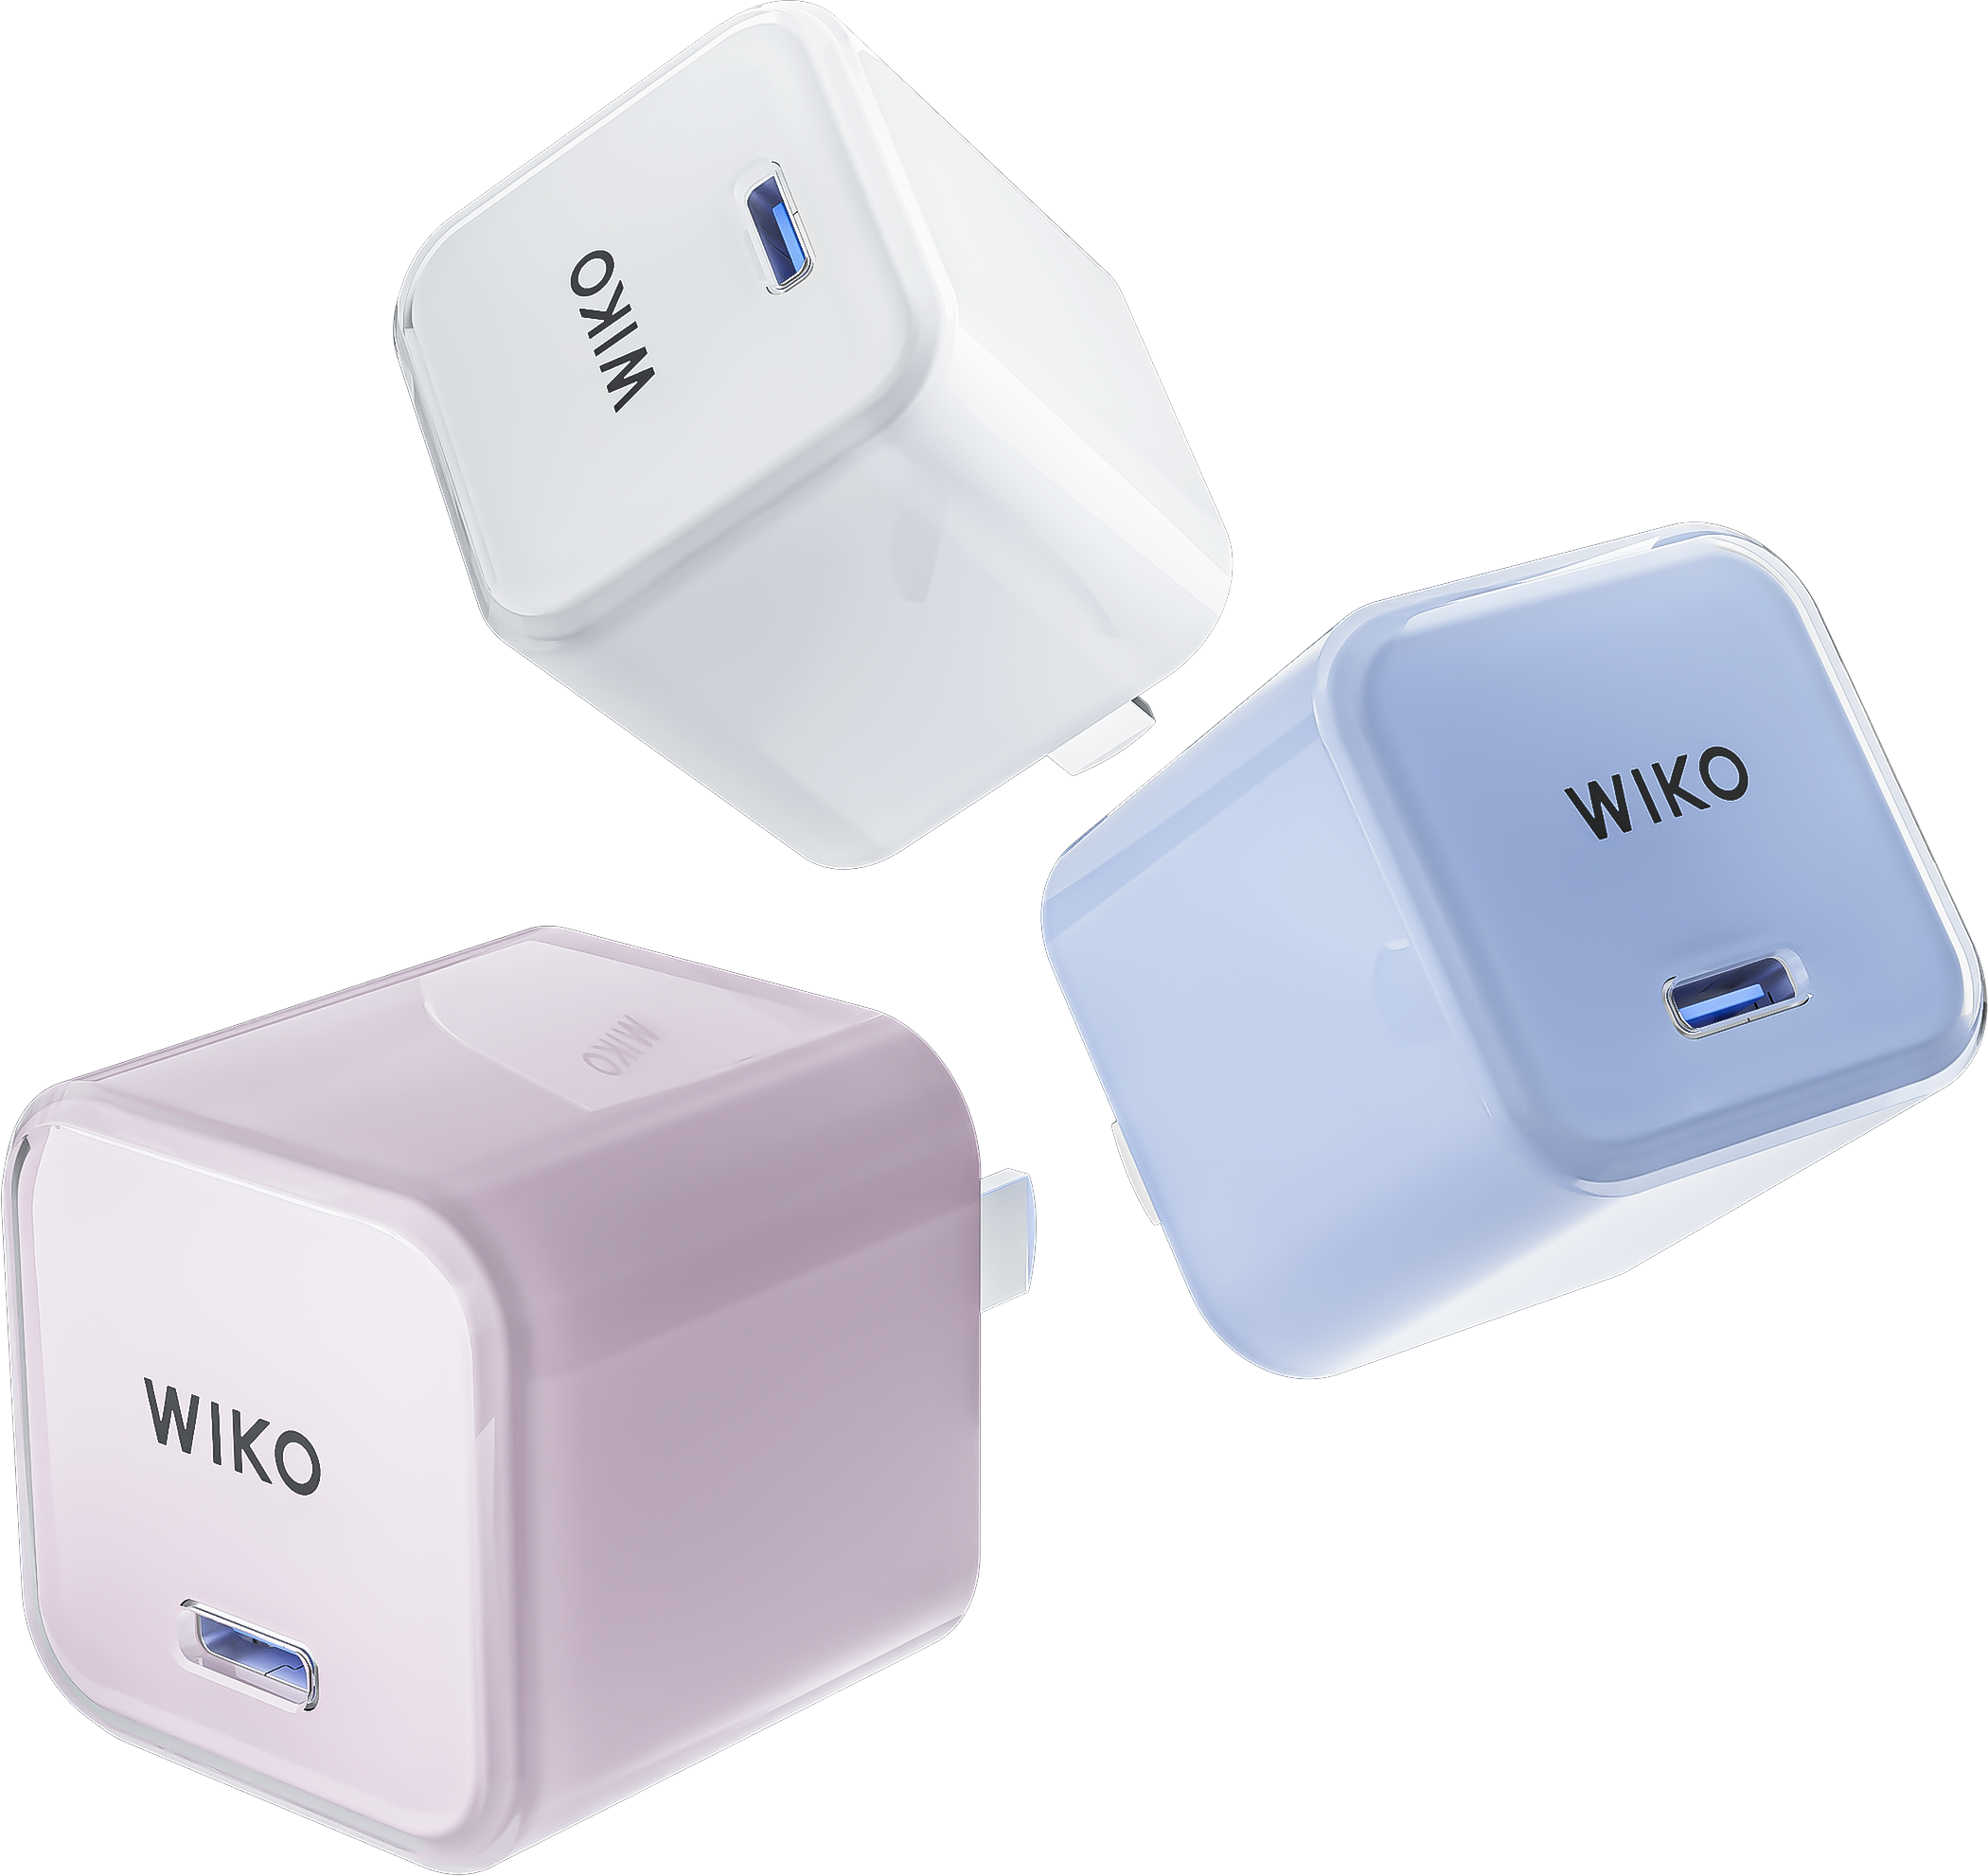 WIKO product